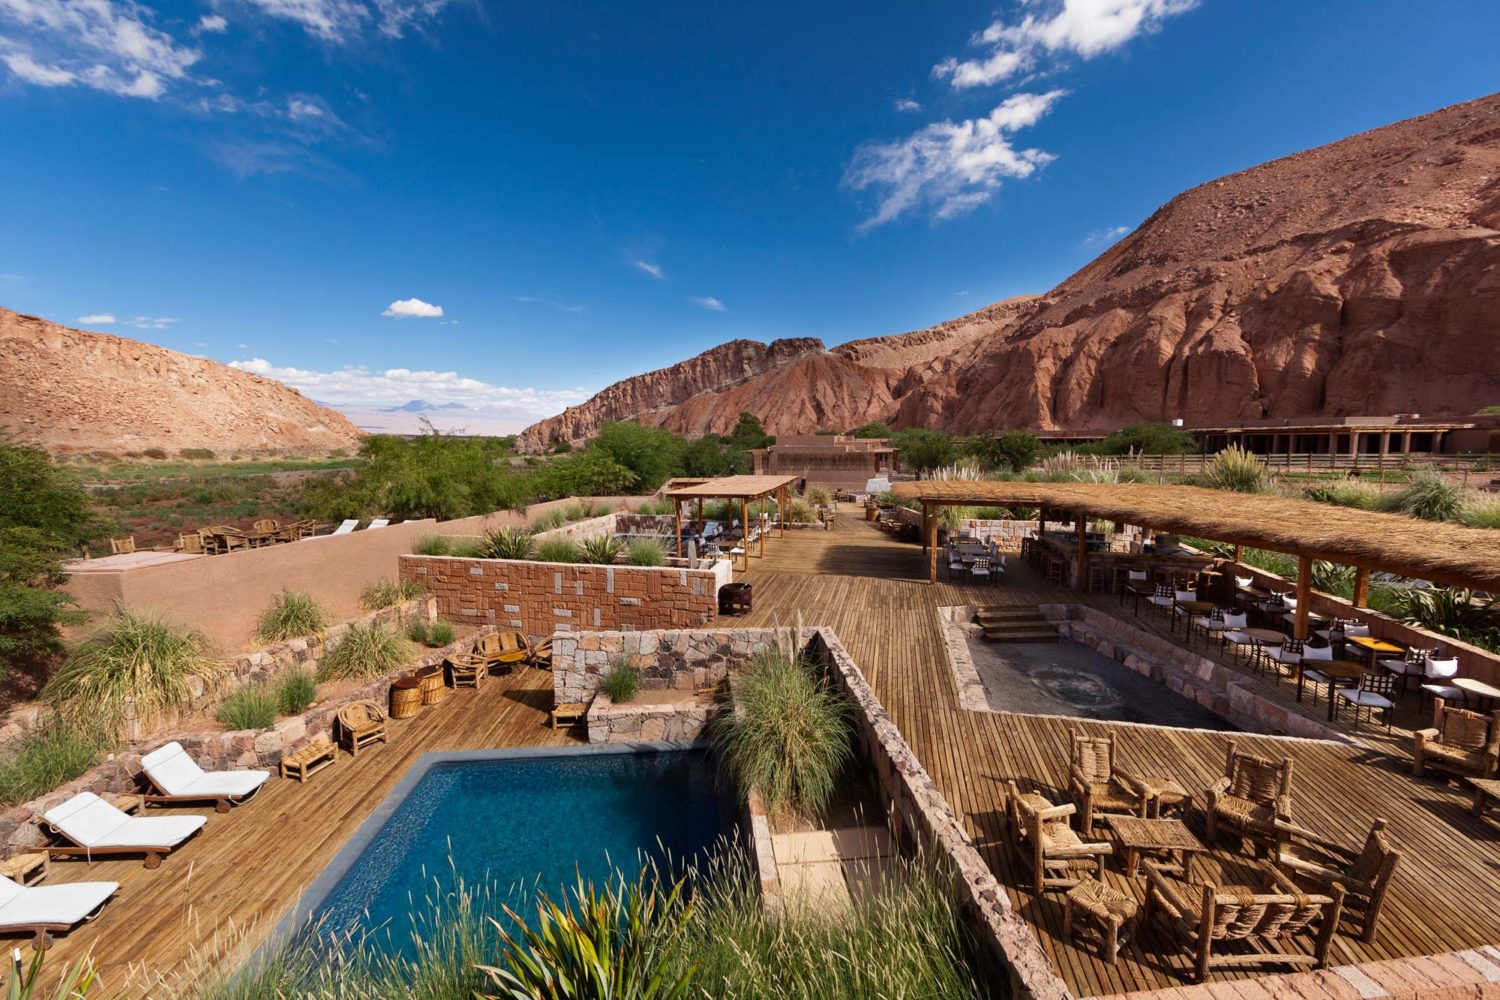 The pool, wooden decking and loungers at Alto Atacama Lodge, Chile with mountains in the backdrop